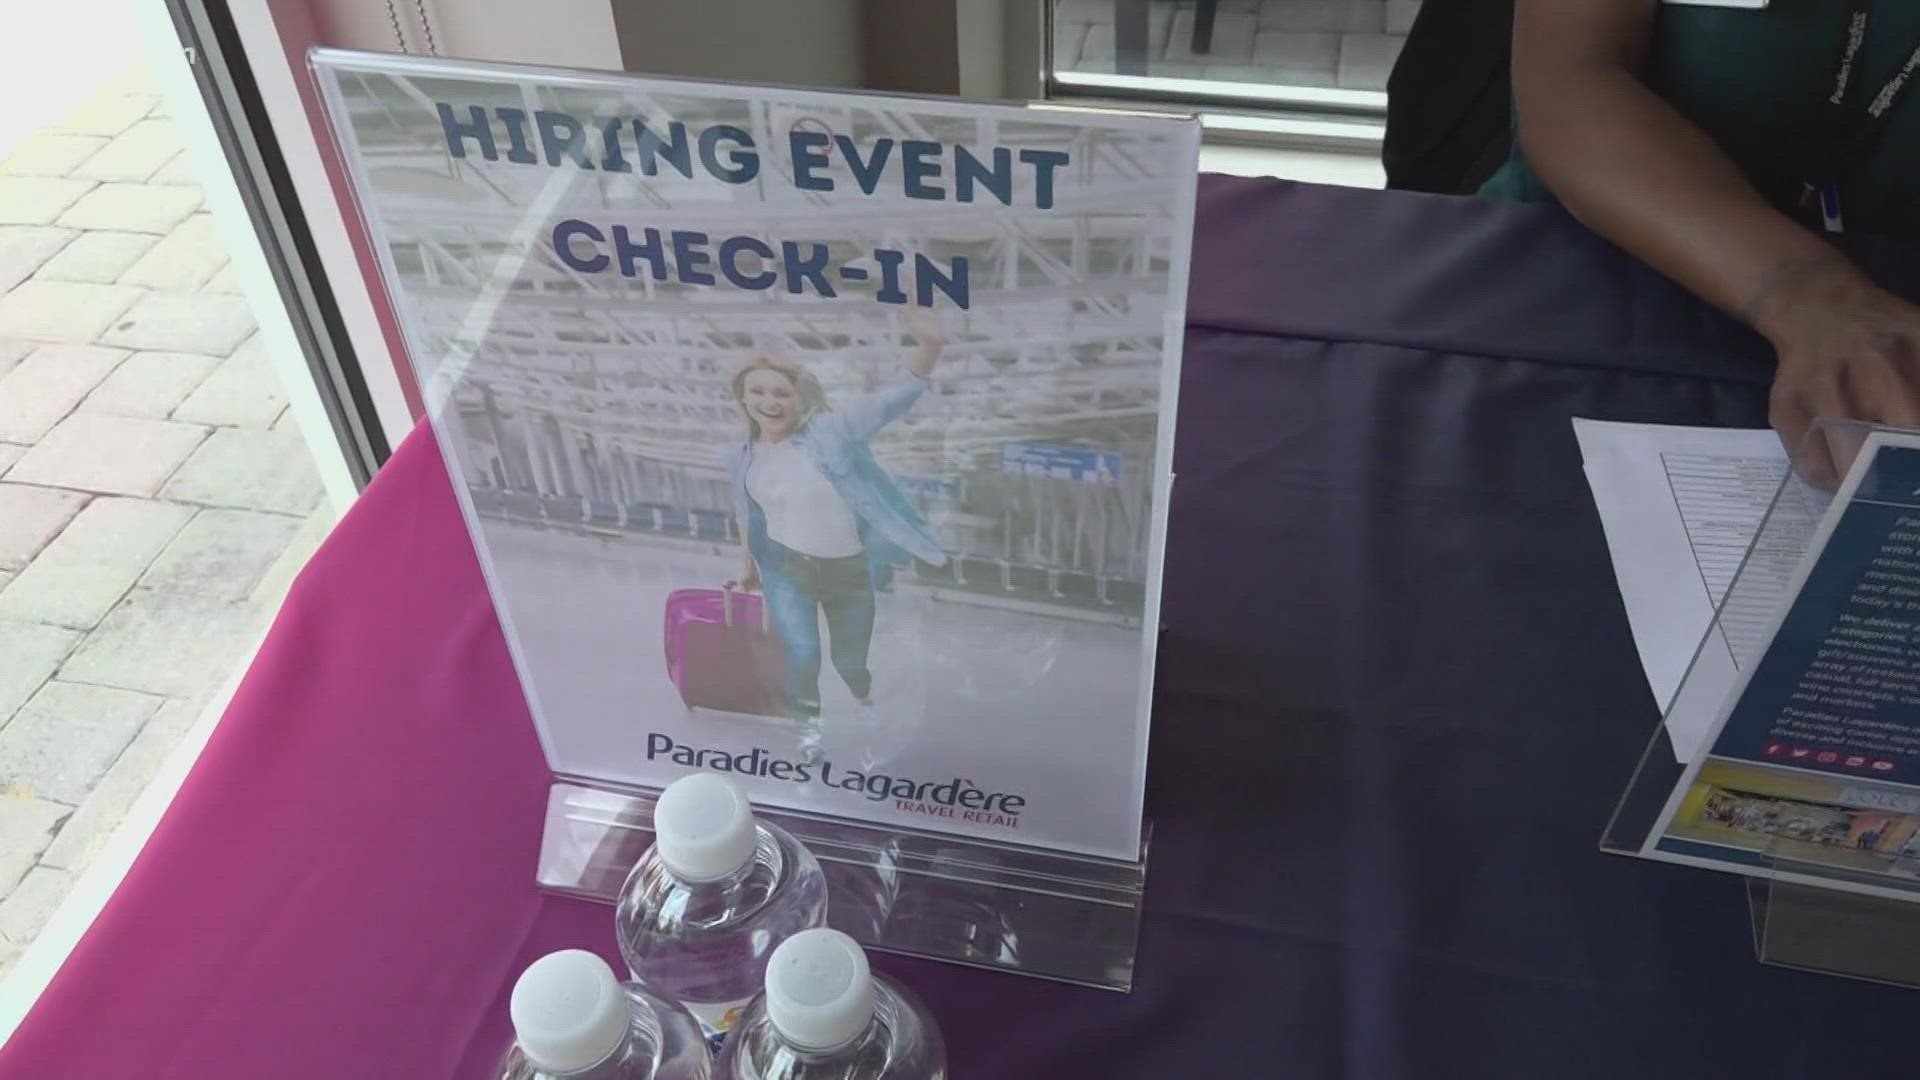 Paradies Lagardere held a hiring event Thursday looking to hire around 100 employees.